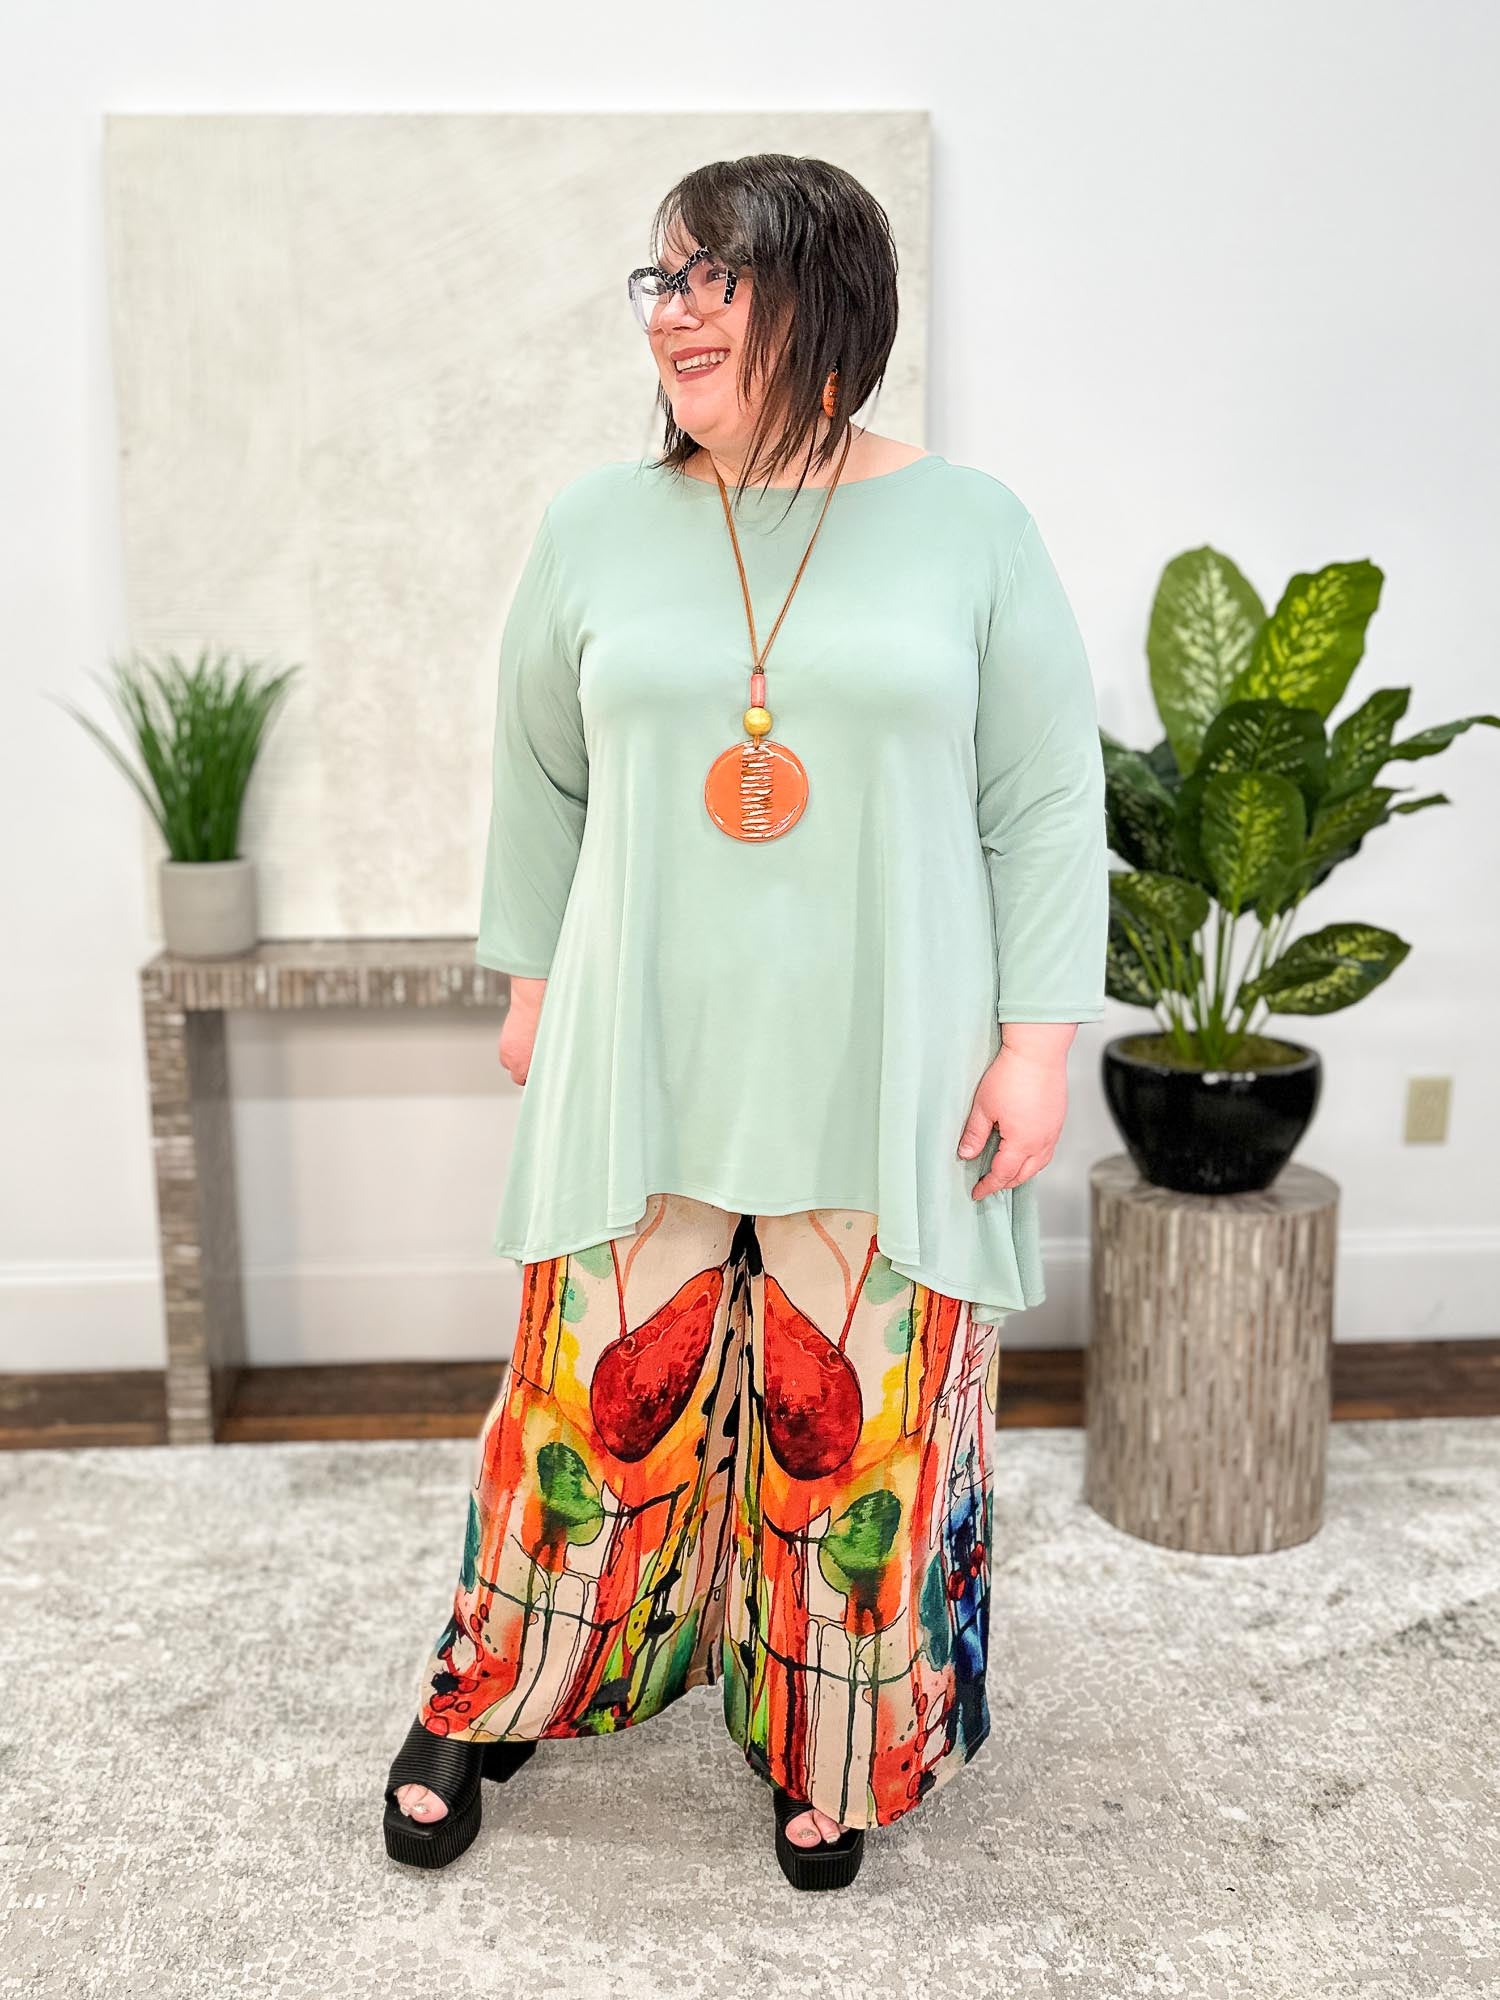 Andrea models Kozan's Dima Top, Sage Vogue with Sterling Styles' Palazzo Pant, Soho and International Duru's Round Pendant Necklace & Earrings Set, Orange